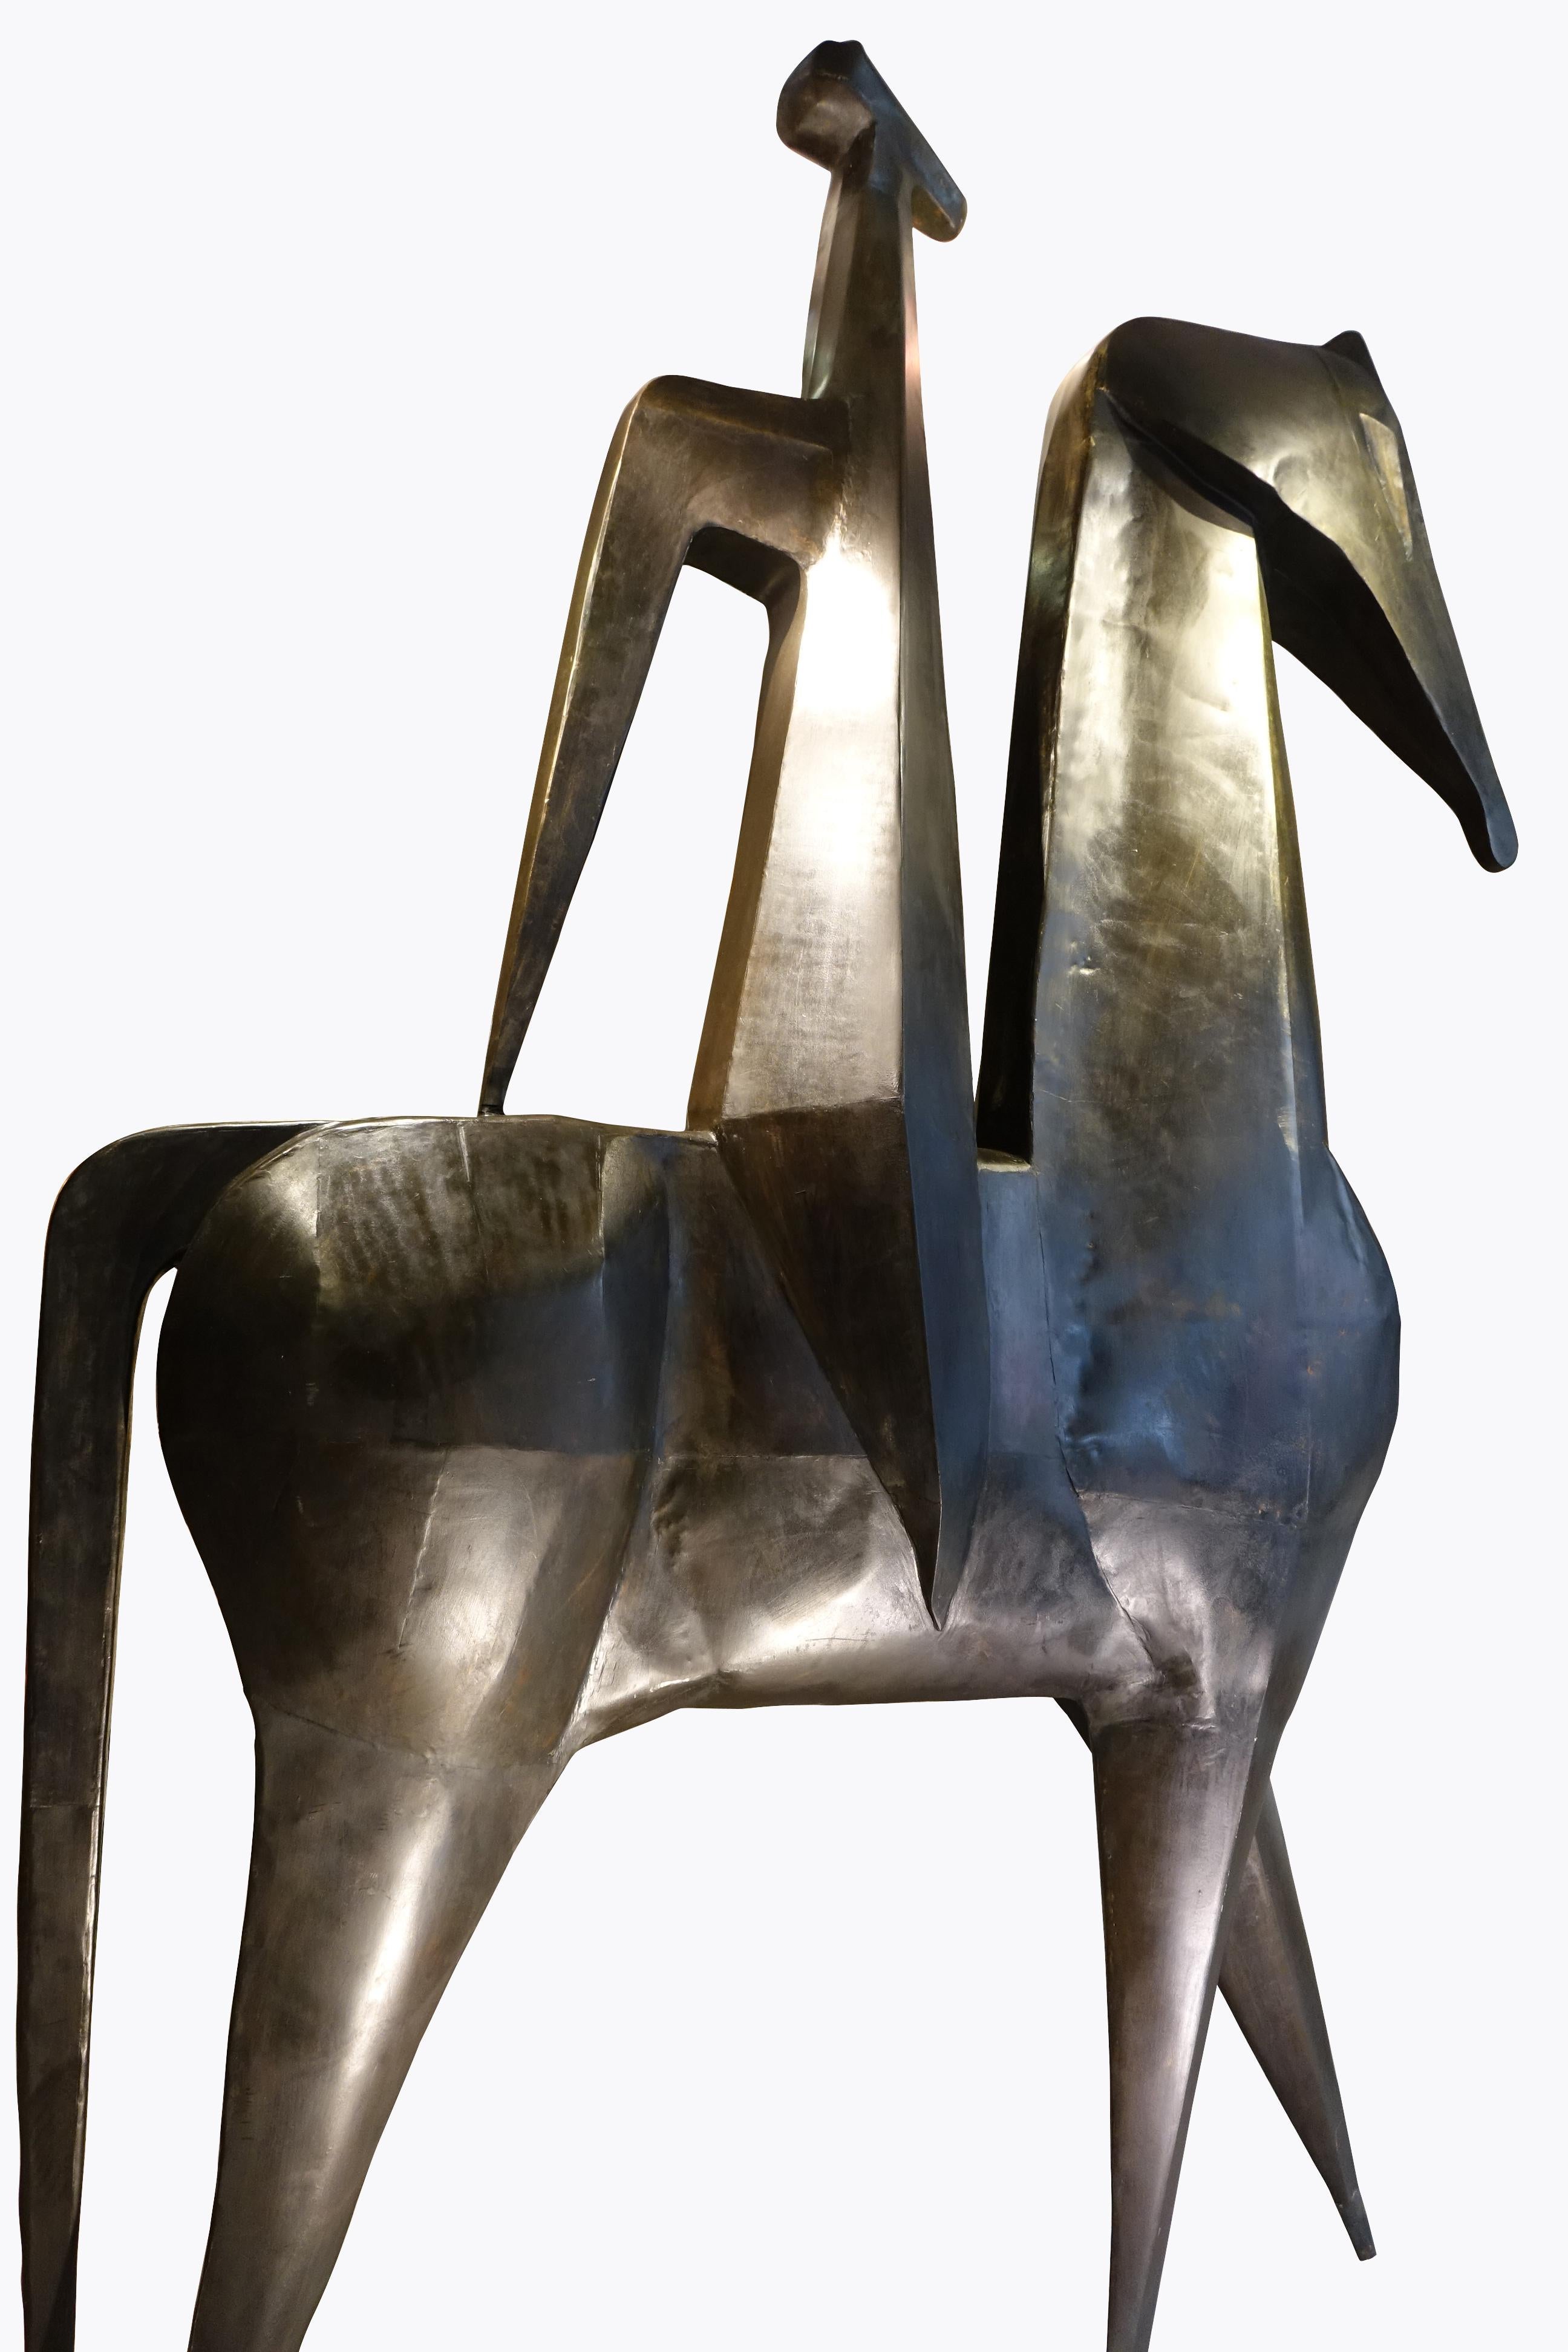 Monumental sculpture (height 2.50m) representing a horseman.
Iron patinated bronze, signed inside a leg H. AMBROSIO, 1967.
The design is very stylized, with angular contours. There is an impression of strength and purity.
It may be a decor for a